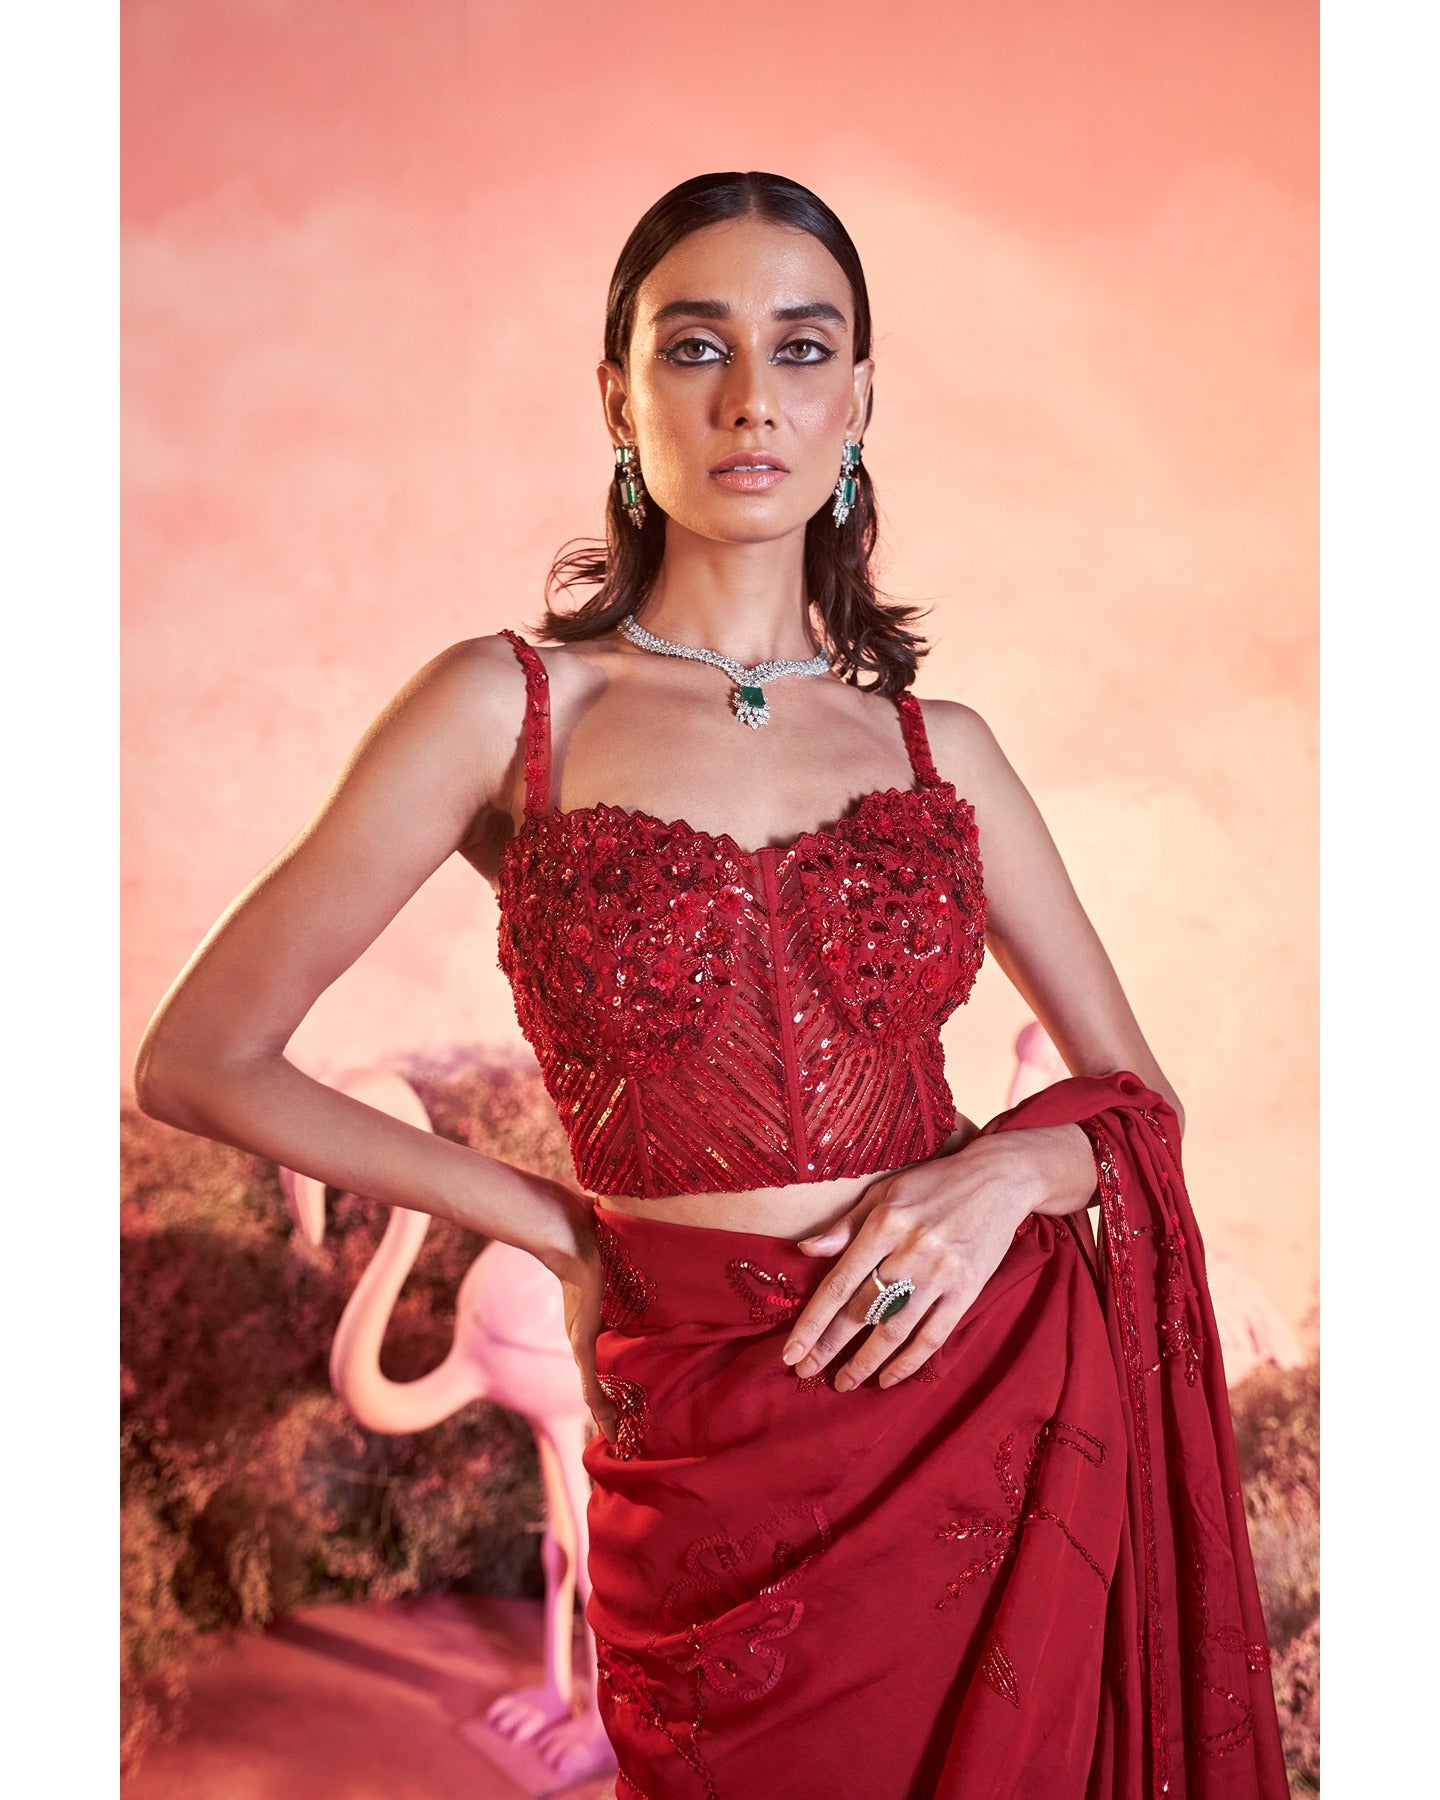 Crimson Chic: A vision in red, where hand-embroidery weaves a story of timeless elegance.